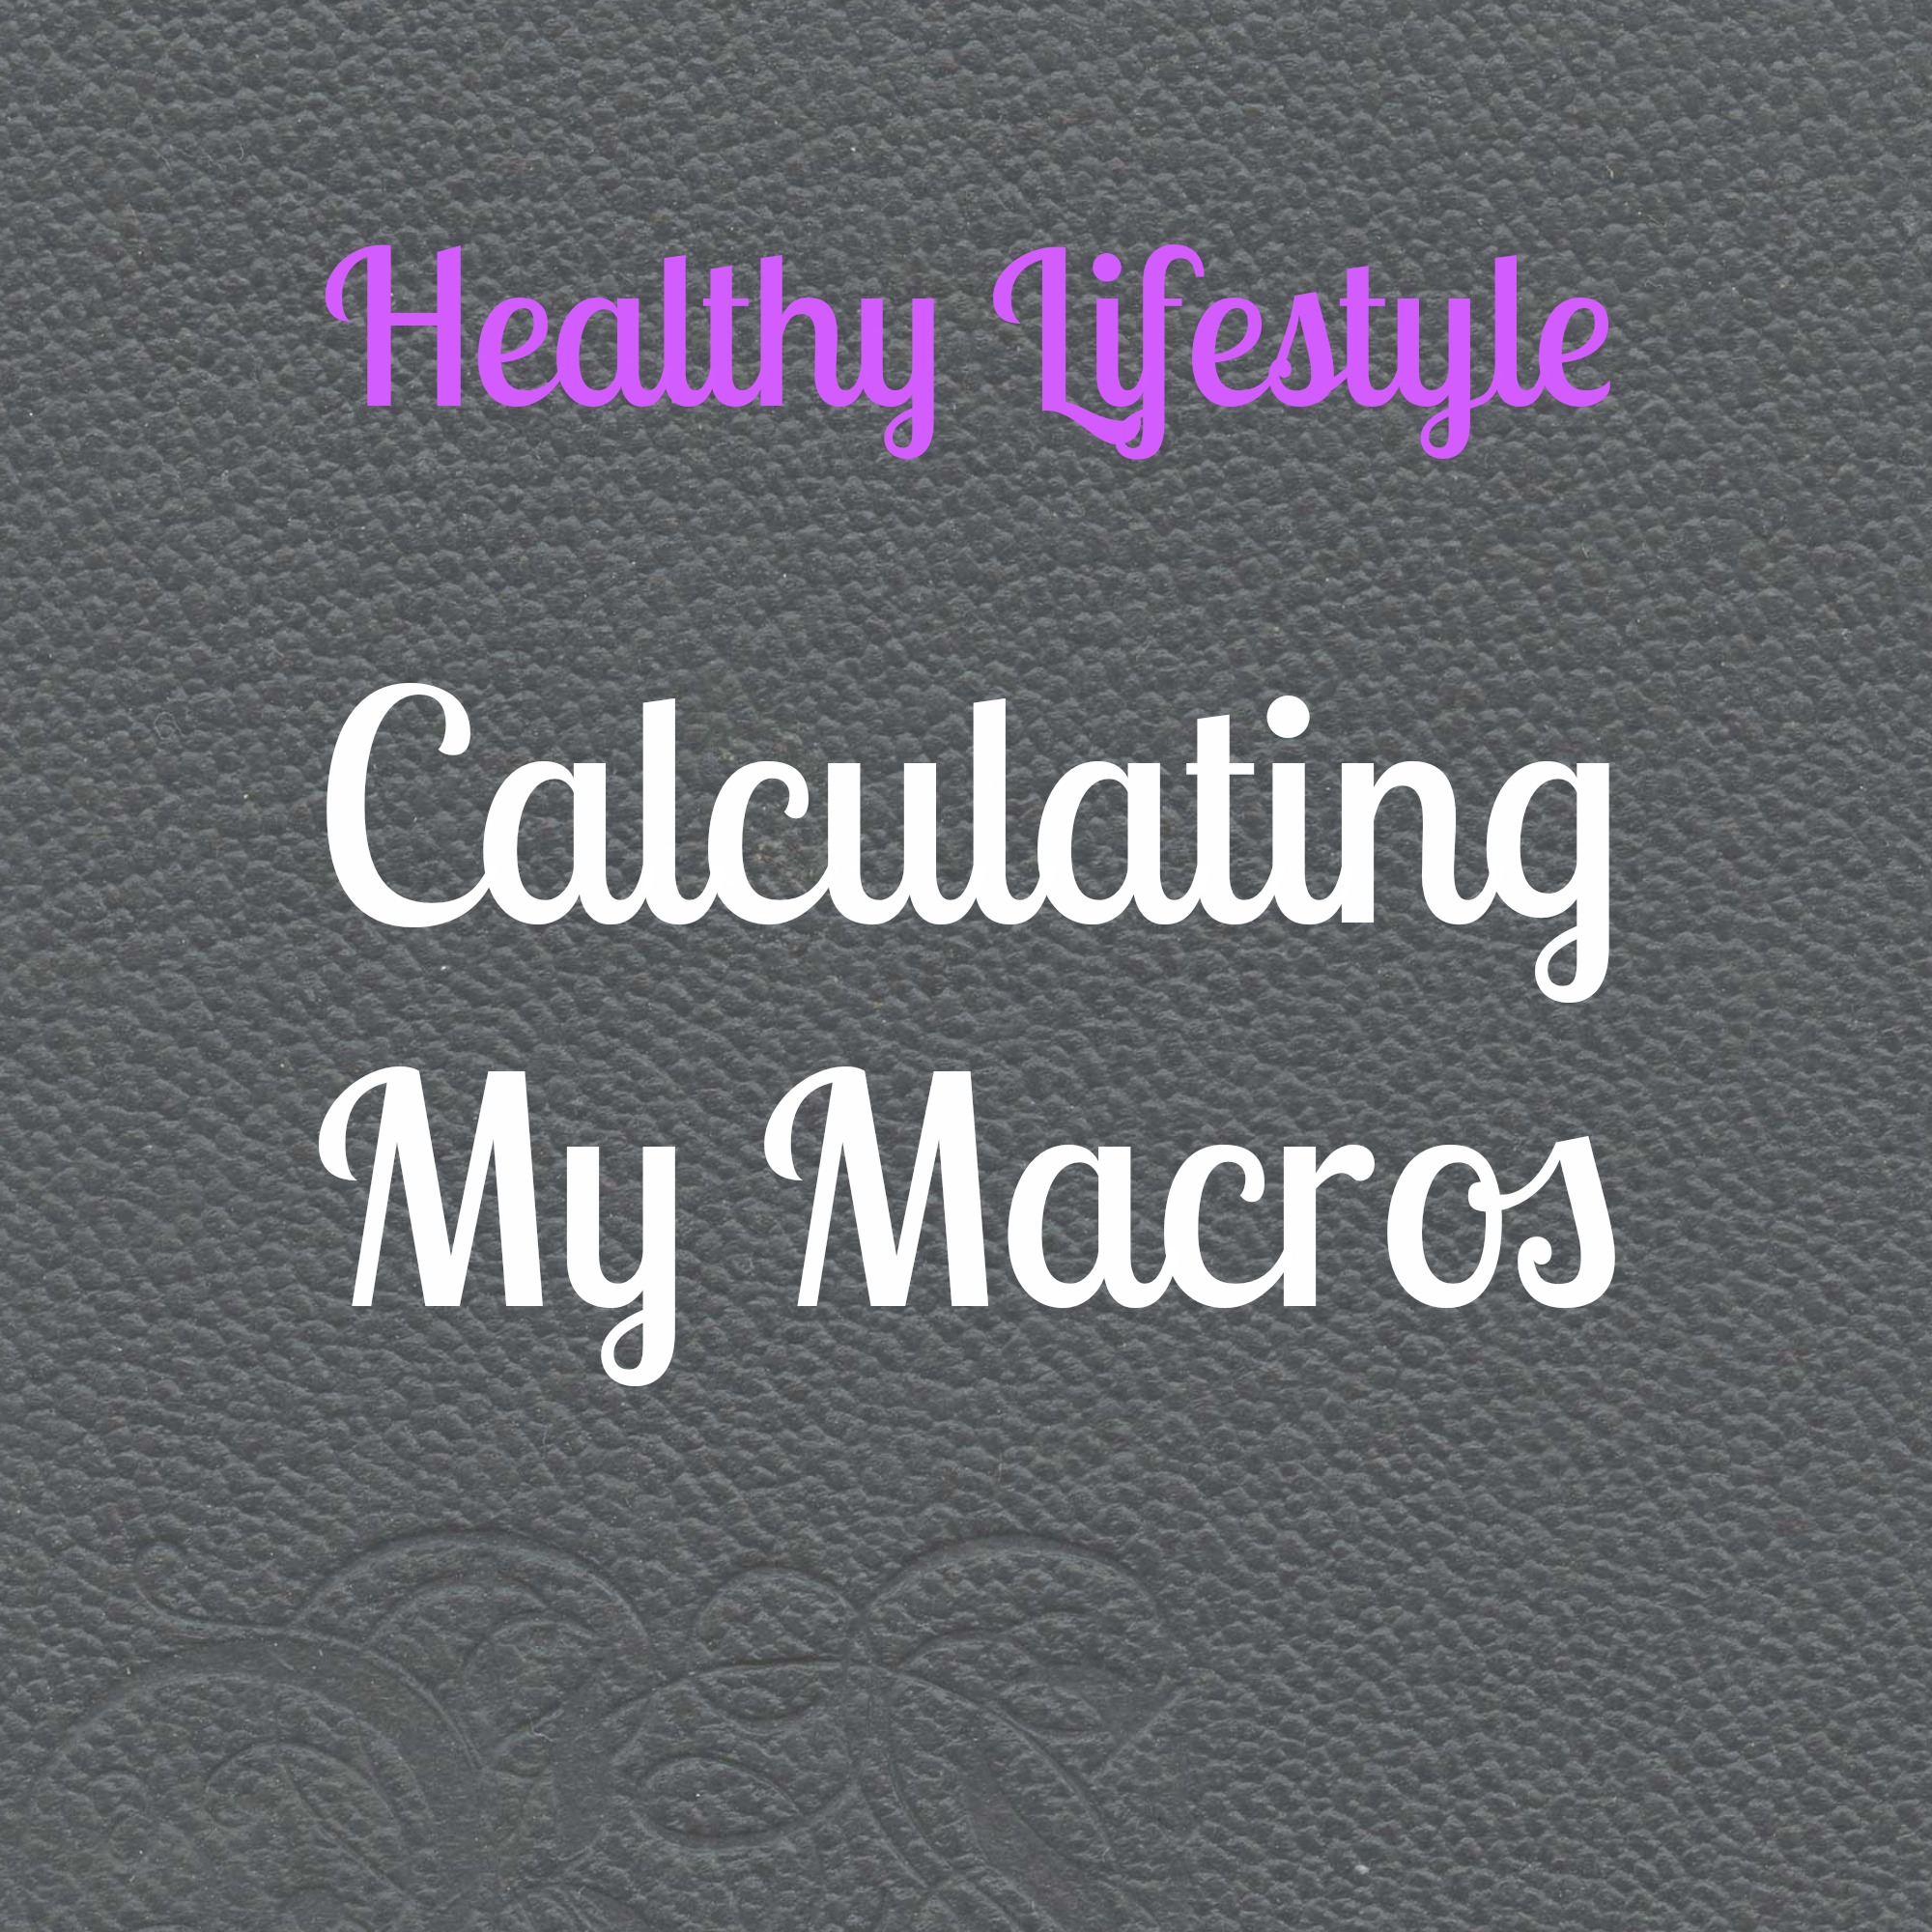 How to Calculate Your Macros